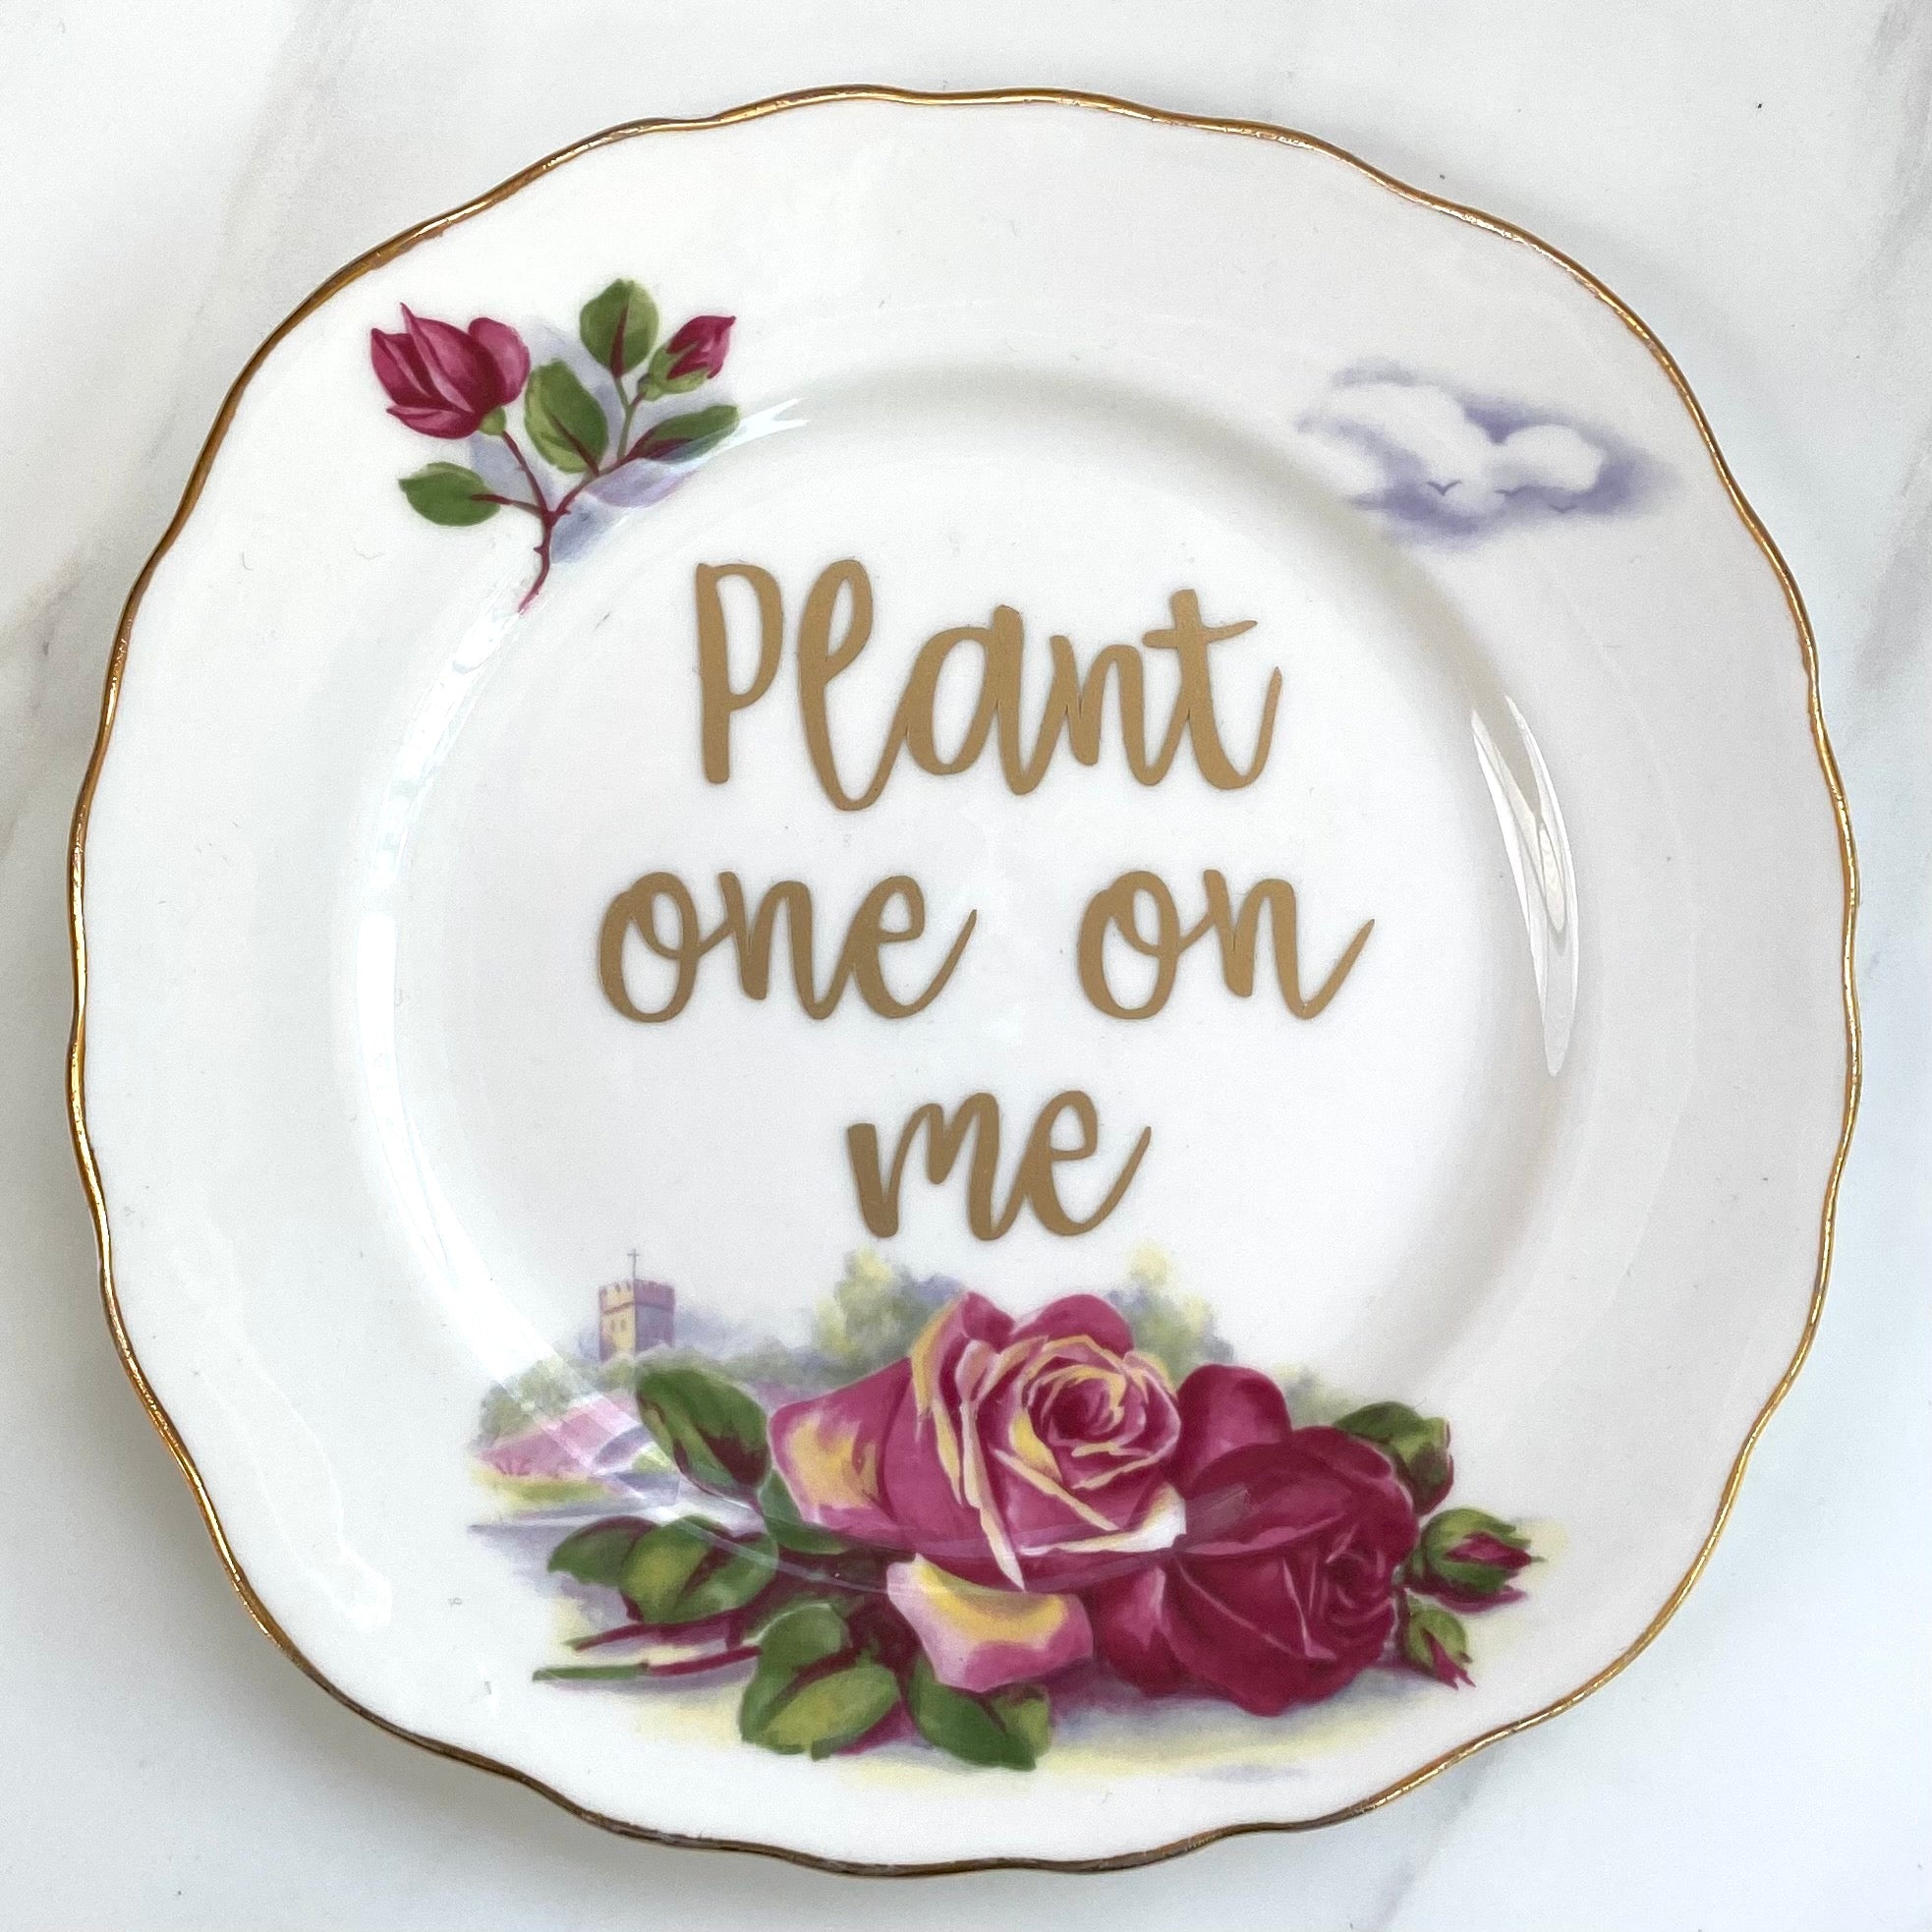 ‘Plant one on me’ quote on plate